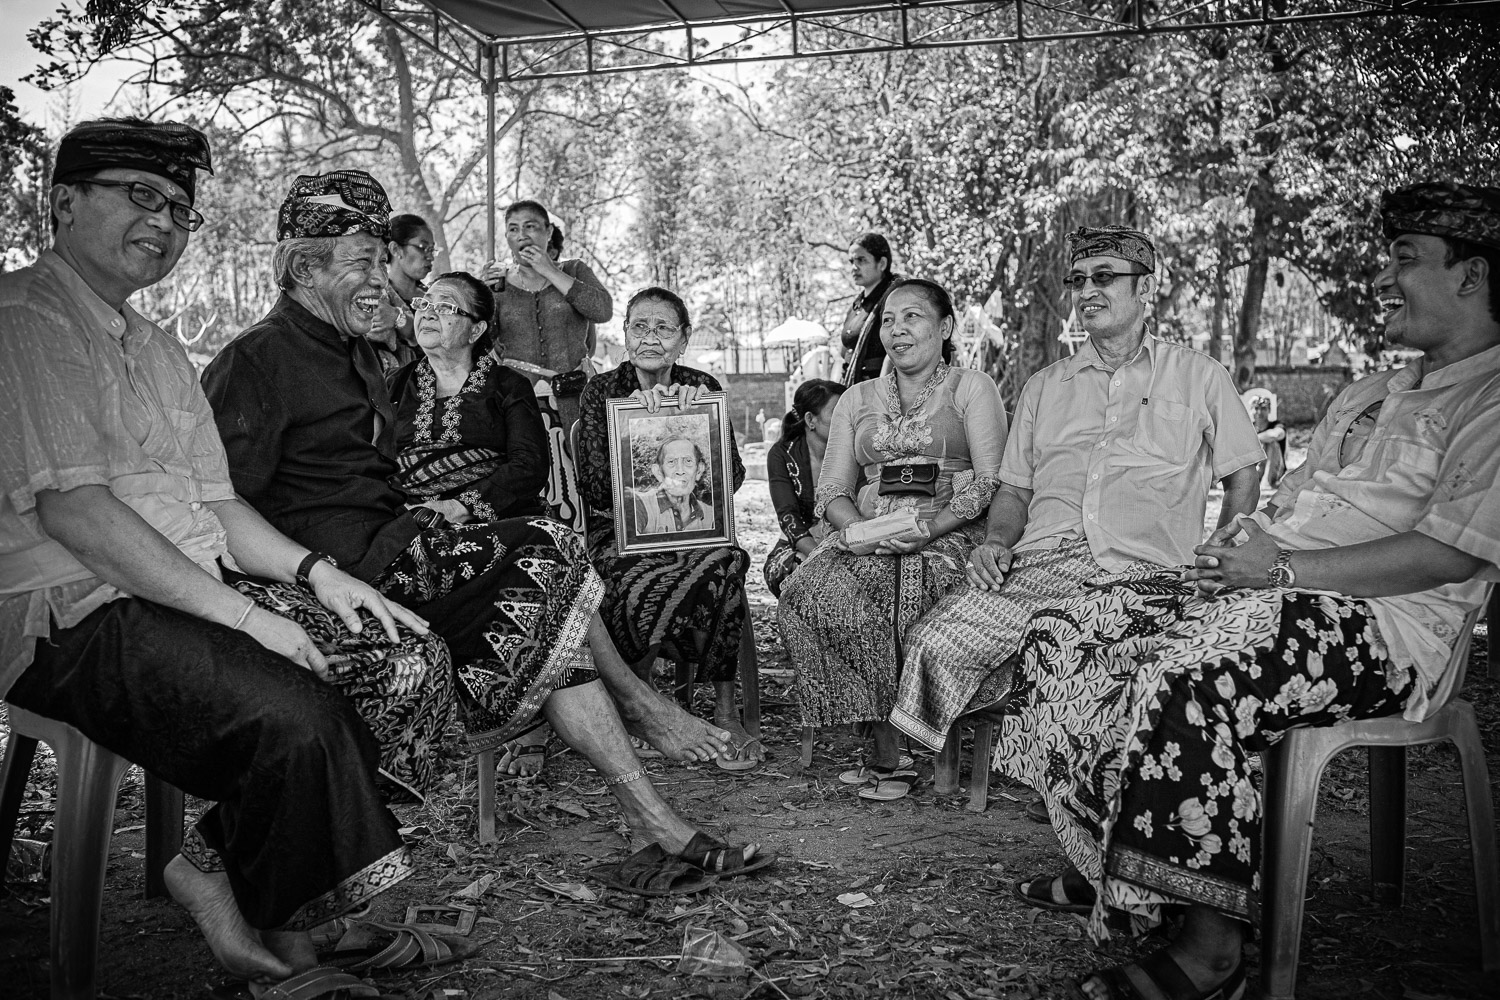 Ngaben cremation in Bali, family gathering at the cremation celebrating the life of the deceased.